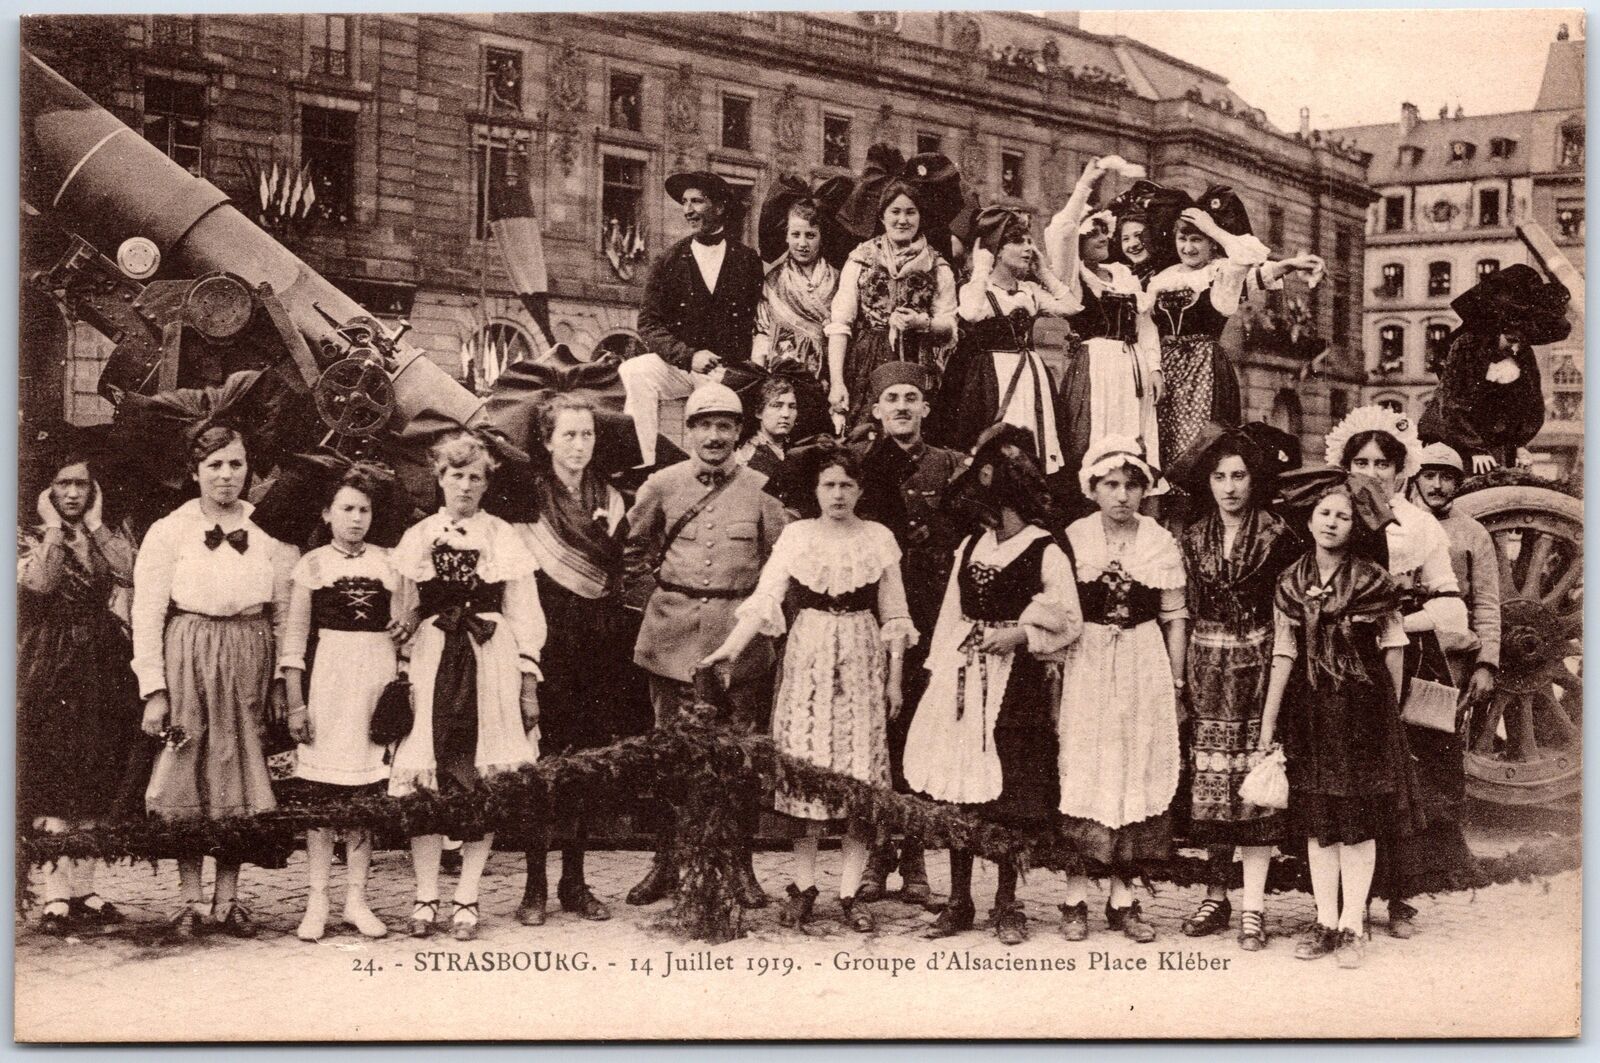 VINTAGE POSTCARD GROUP OF LIBERATED ALSACIANS AT STRASBOURG (FRANCE) END OF WW I